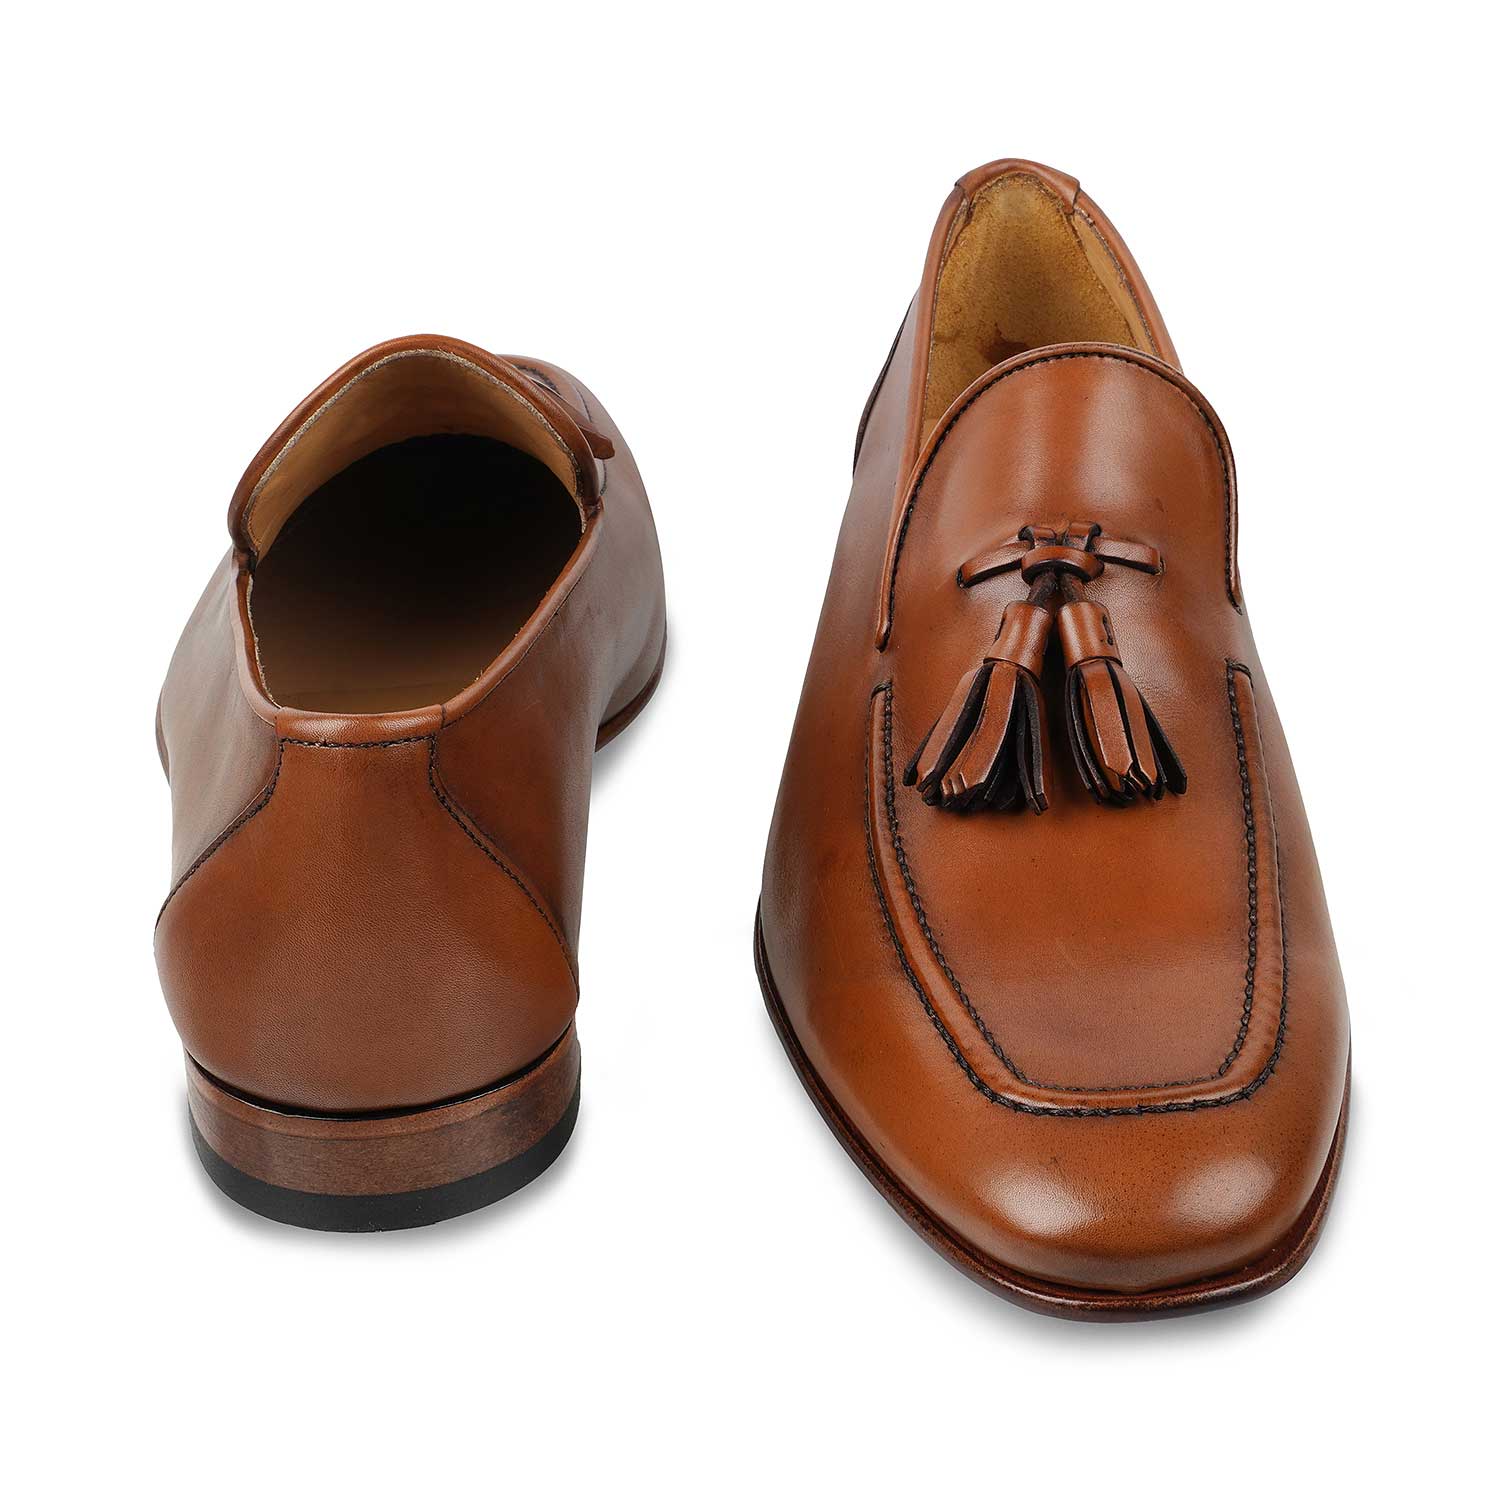 The Maffeo Tan Men's Handcrafted Leather Loafers Tresmode - Tresmode